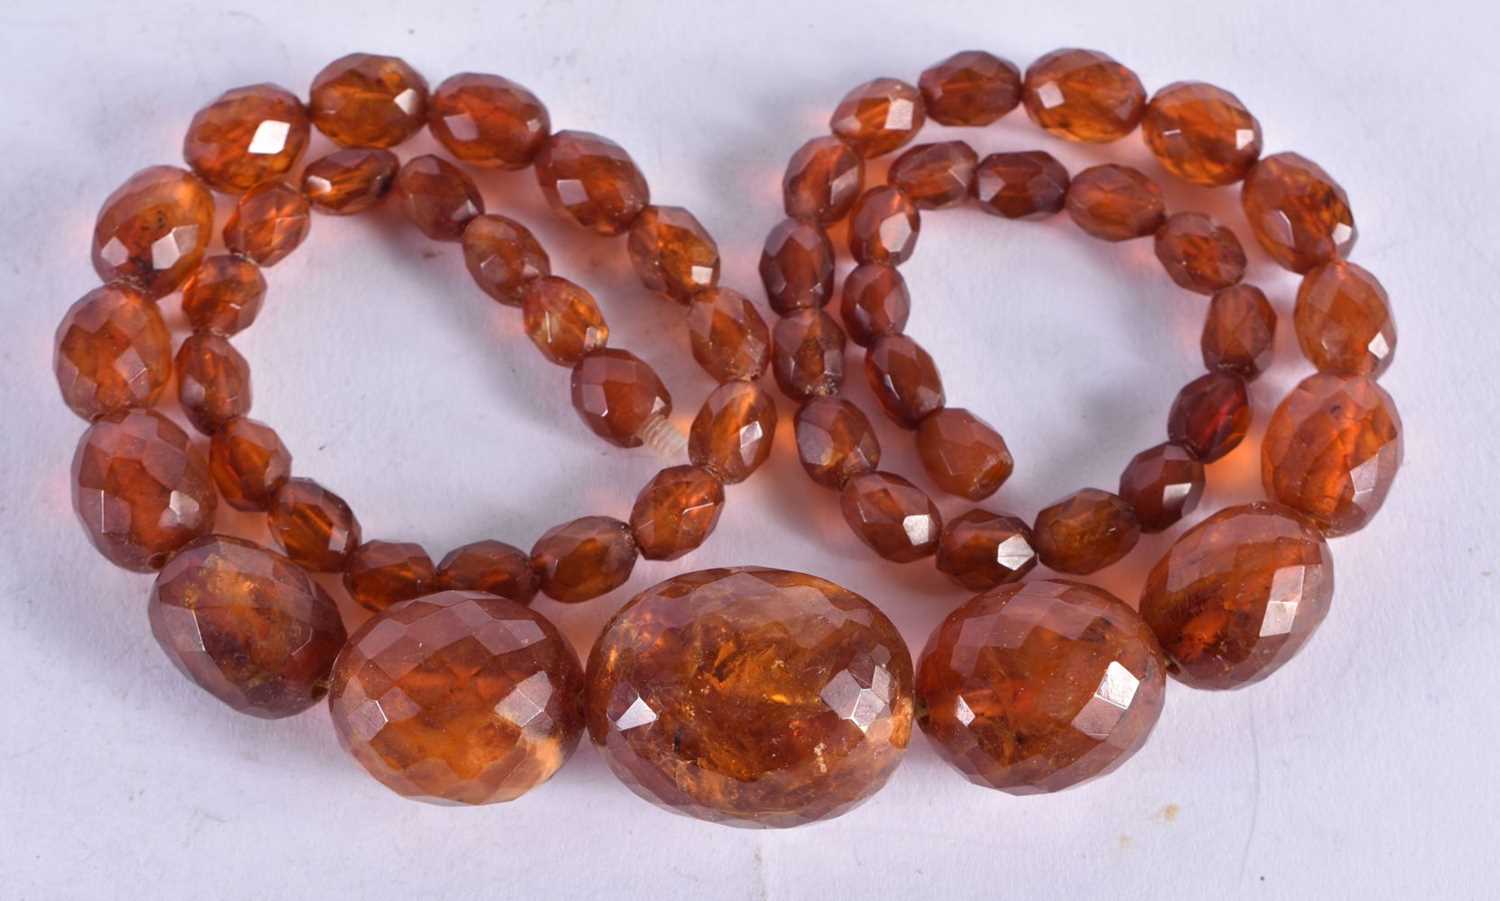 A Faceted Amber Bead Necklace. 58cm long, largest Bead 20mm, weight 35g